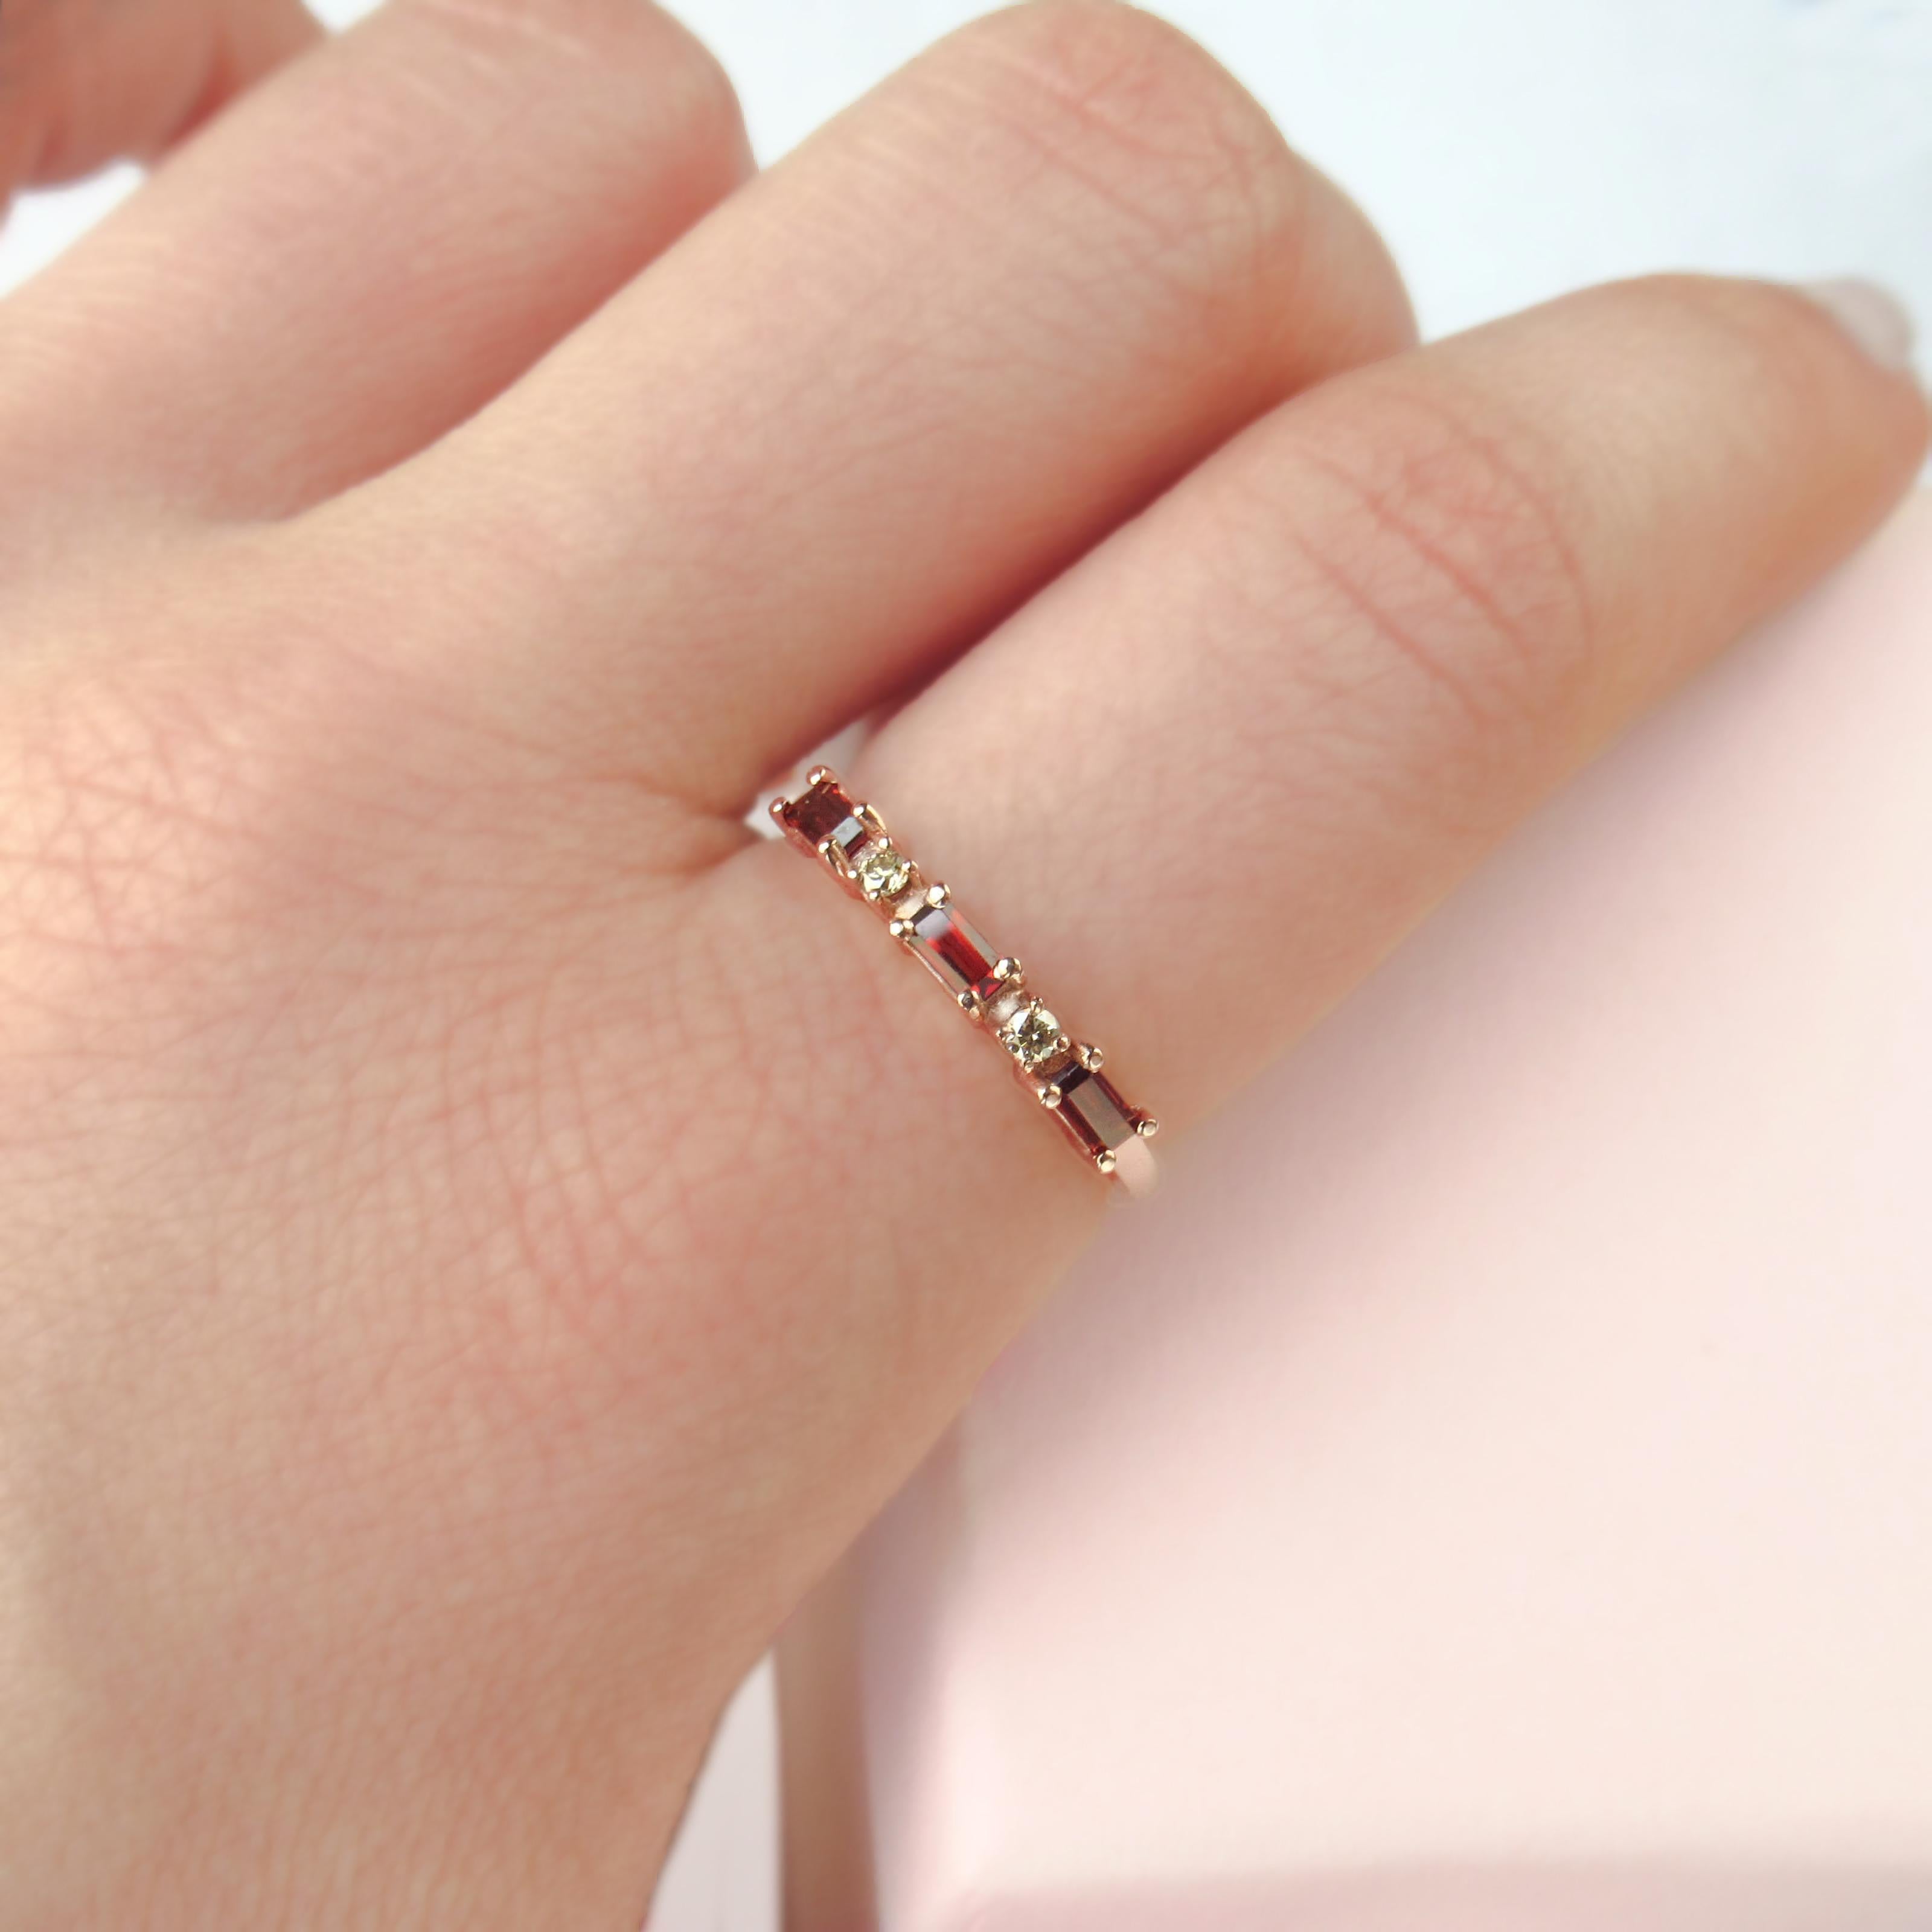 Available in size 7.0 (ready to ship next day) but can be sized upon request, please note that we take 5 business days to modify your jewel before its ready to ship.

This 14 karat rose gold ring has three baguette garnets that have been carefully